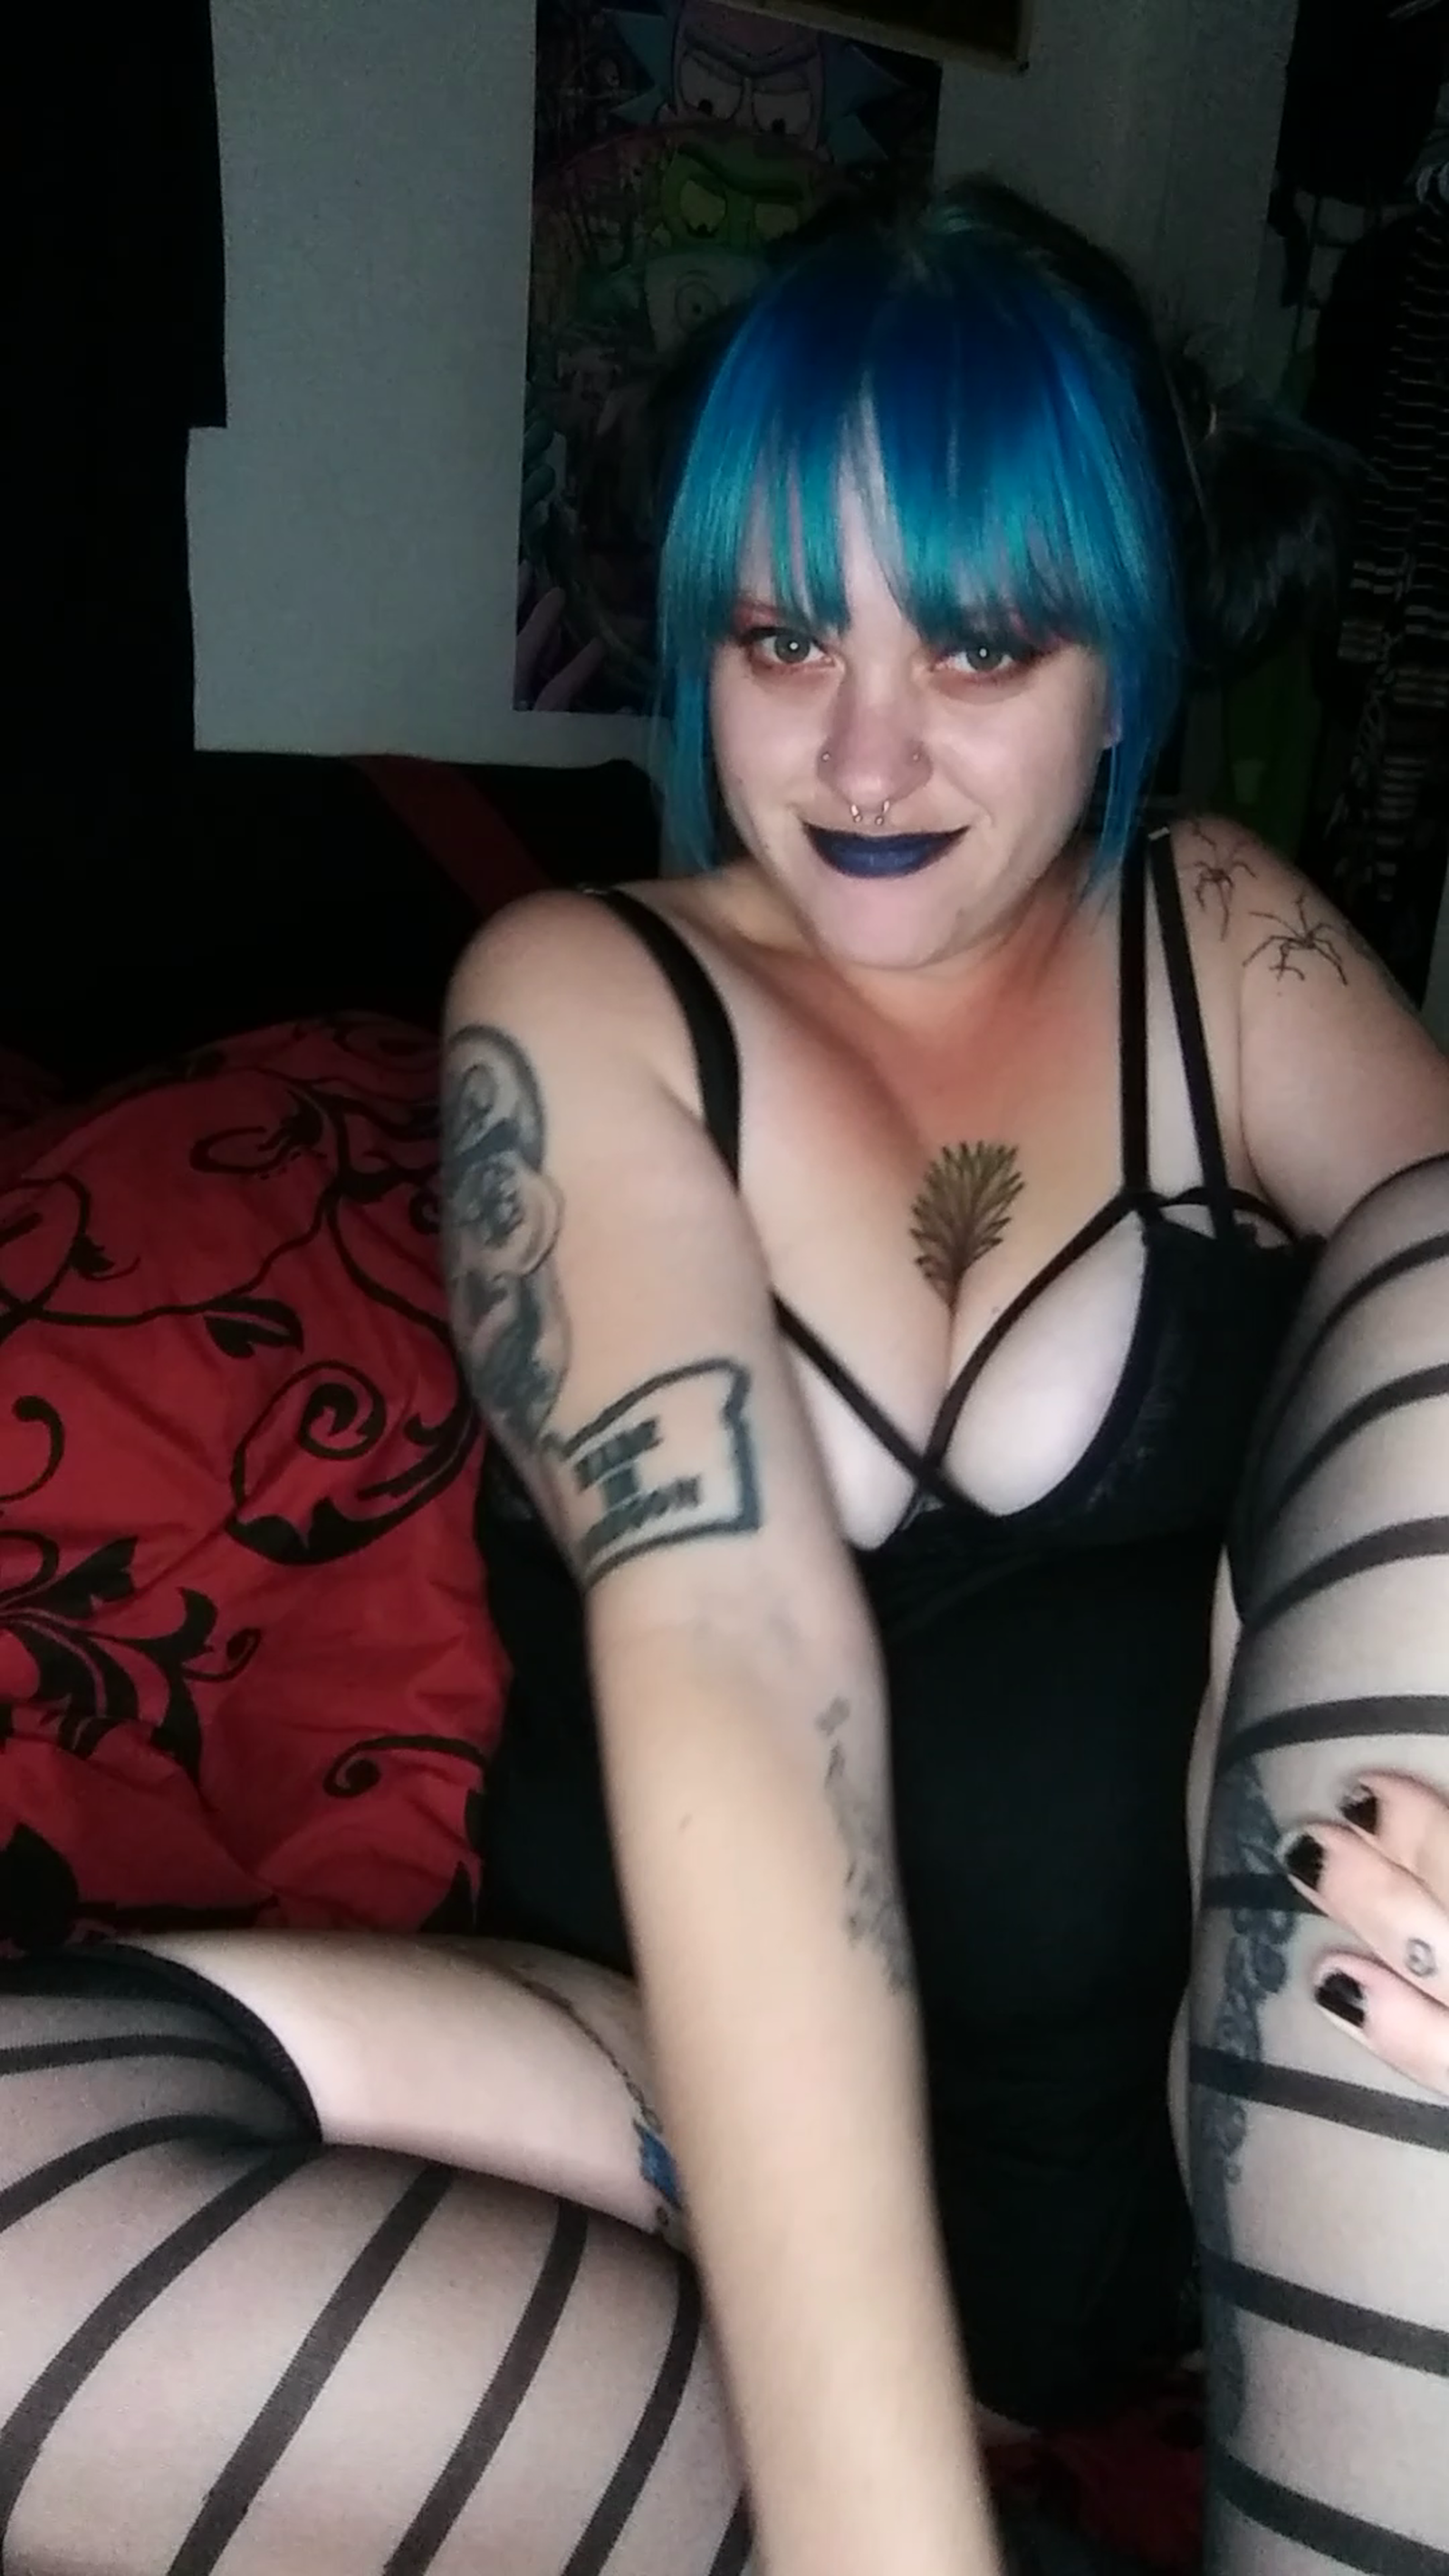 Video by villainous vixen with the username @villainousvixen, who is a star user,  August 1, 2020 at 6:57 AM and the text says 'message me! hahah!'